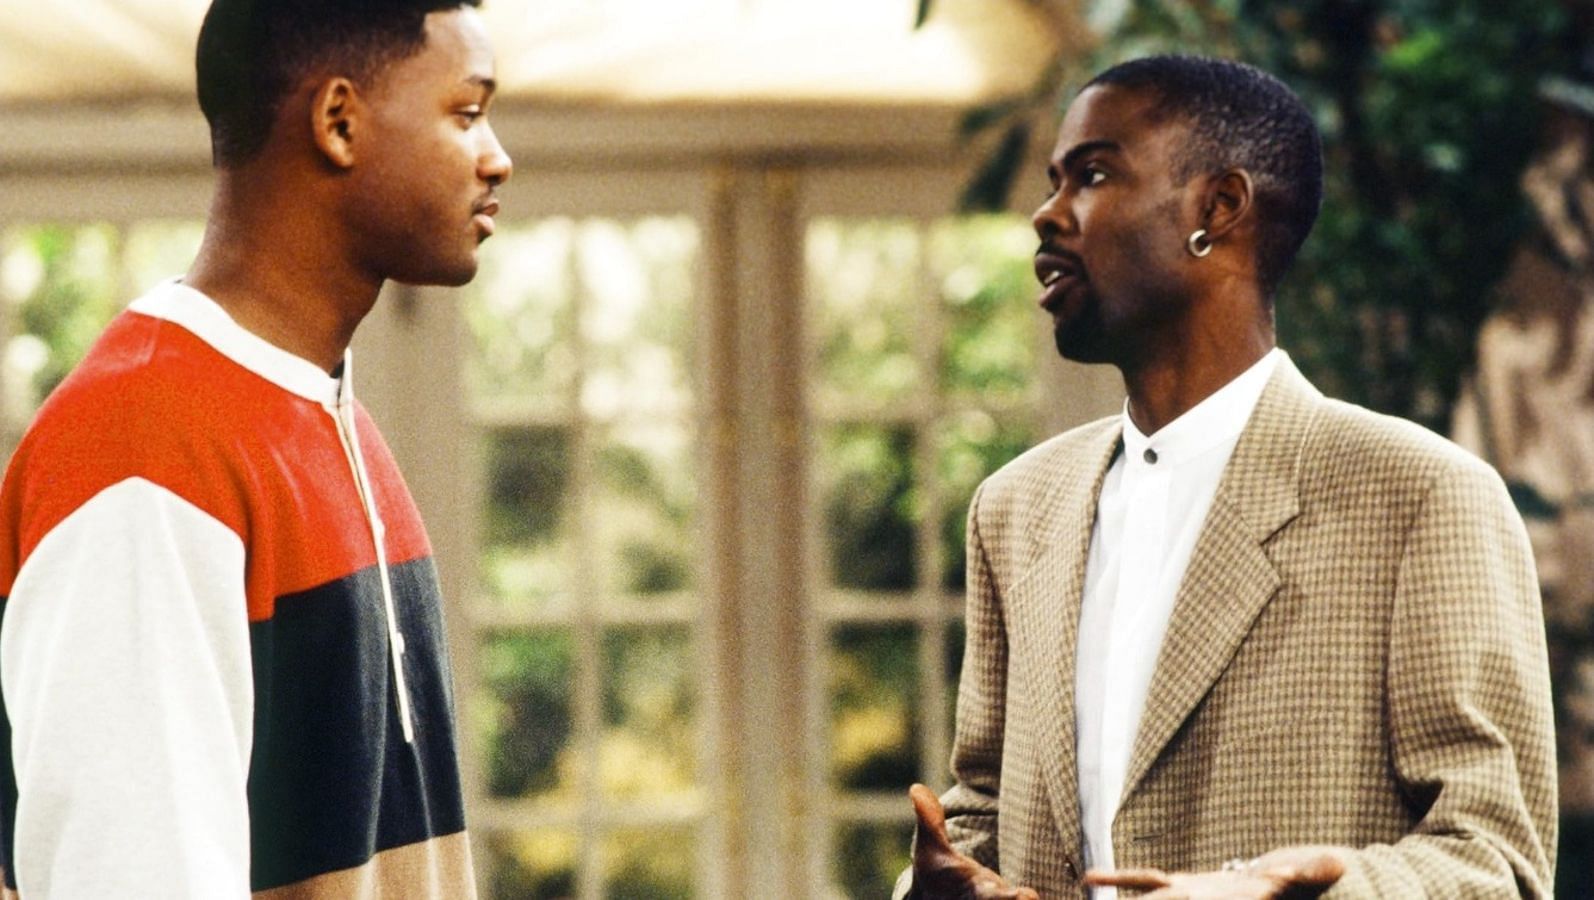 Will Smith and Chris Rock in The Fresh Prince of Bel-Air (Image via IMDb)